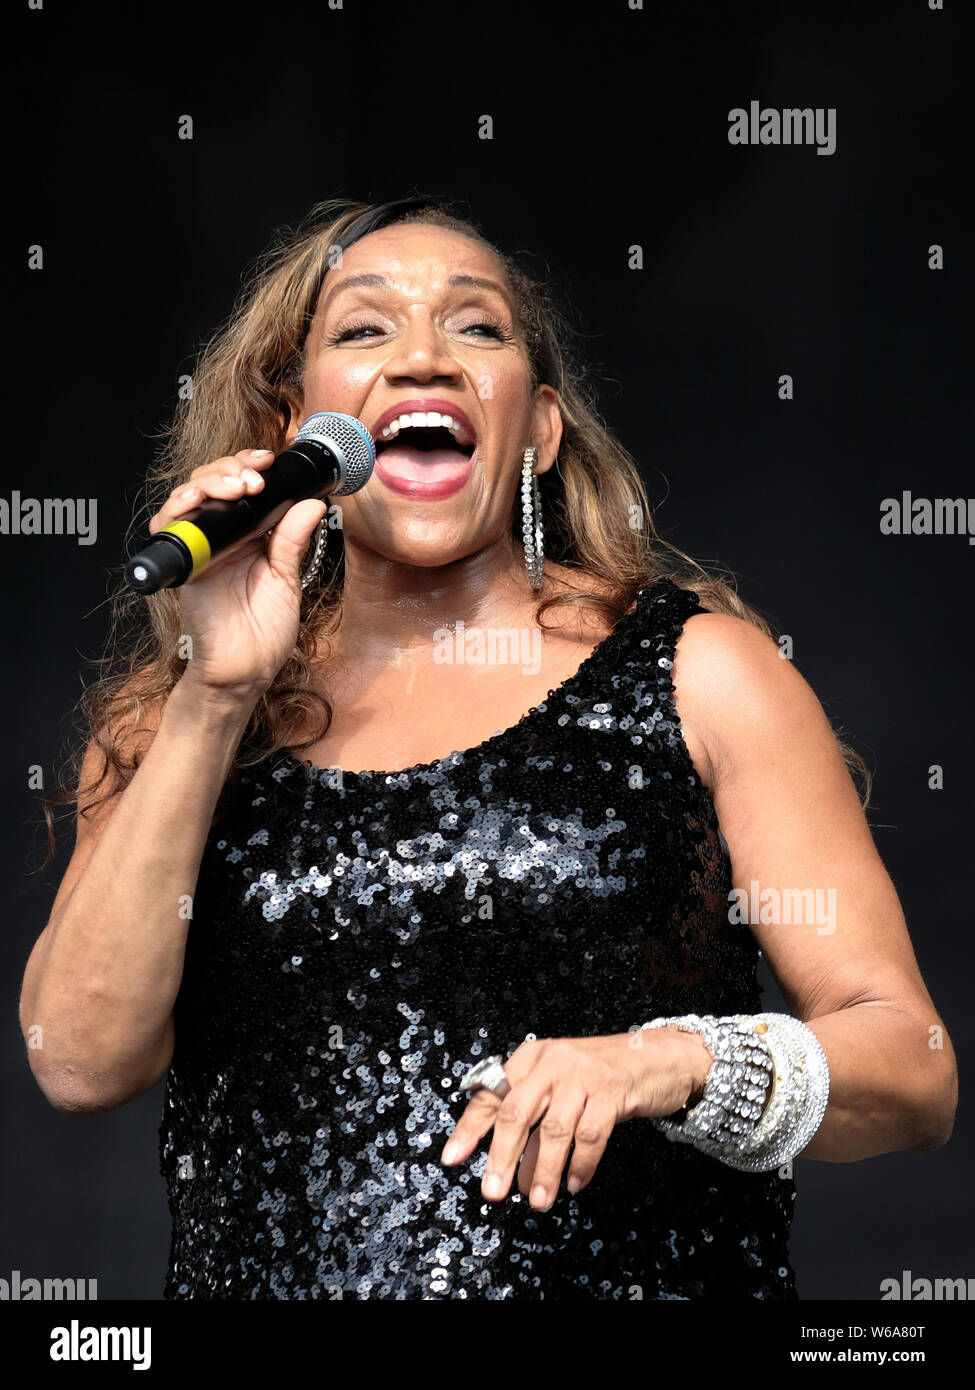 Lulworth, UK. 28th July, 2019. Kathy Sledge, one of the original female vocalists and founding member with Grammy Award winning American musical vocal group Sister Sledge, performing live on stage at Camp Bestival family music festival in Lulworth, Dorset, UK. Credit: SOPA Images Limited/Alamy Live News Stock Photo